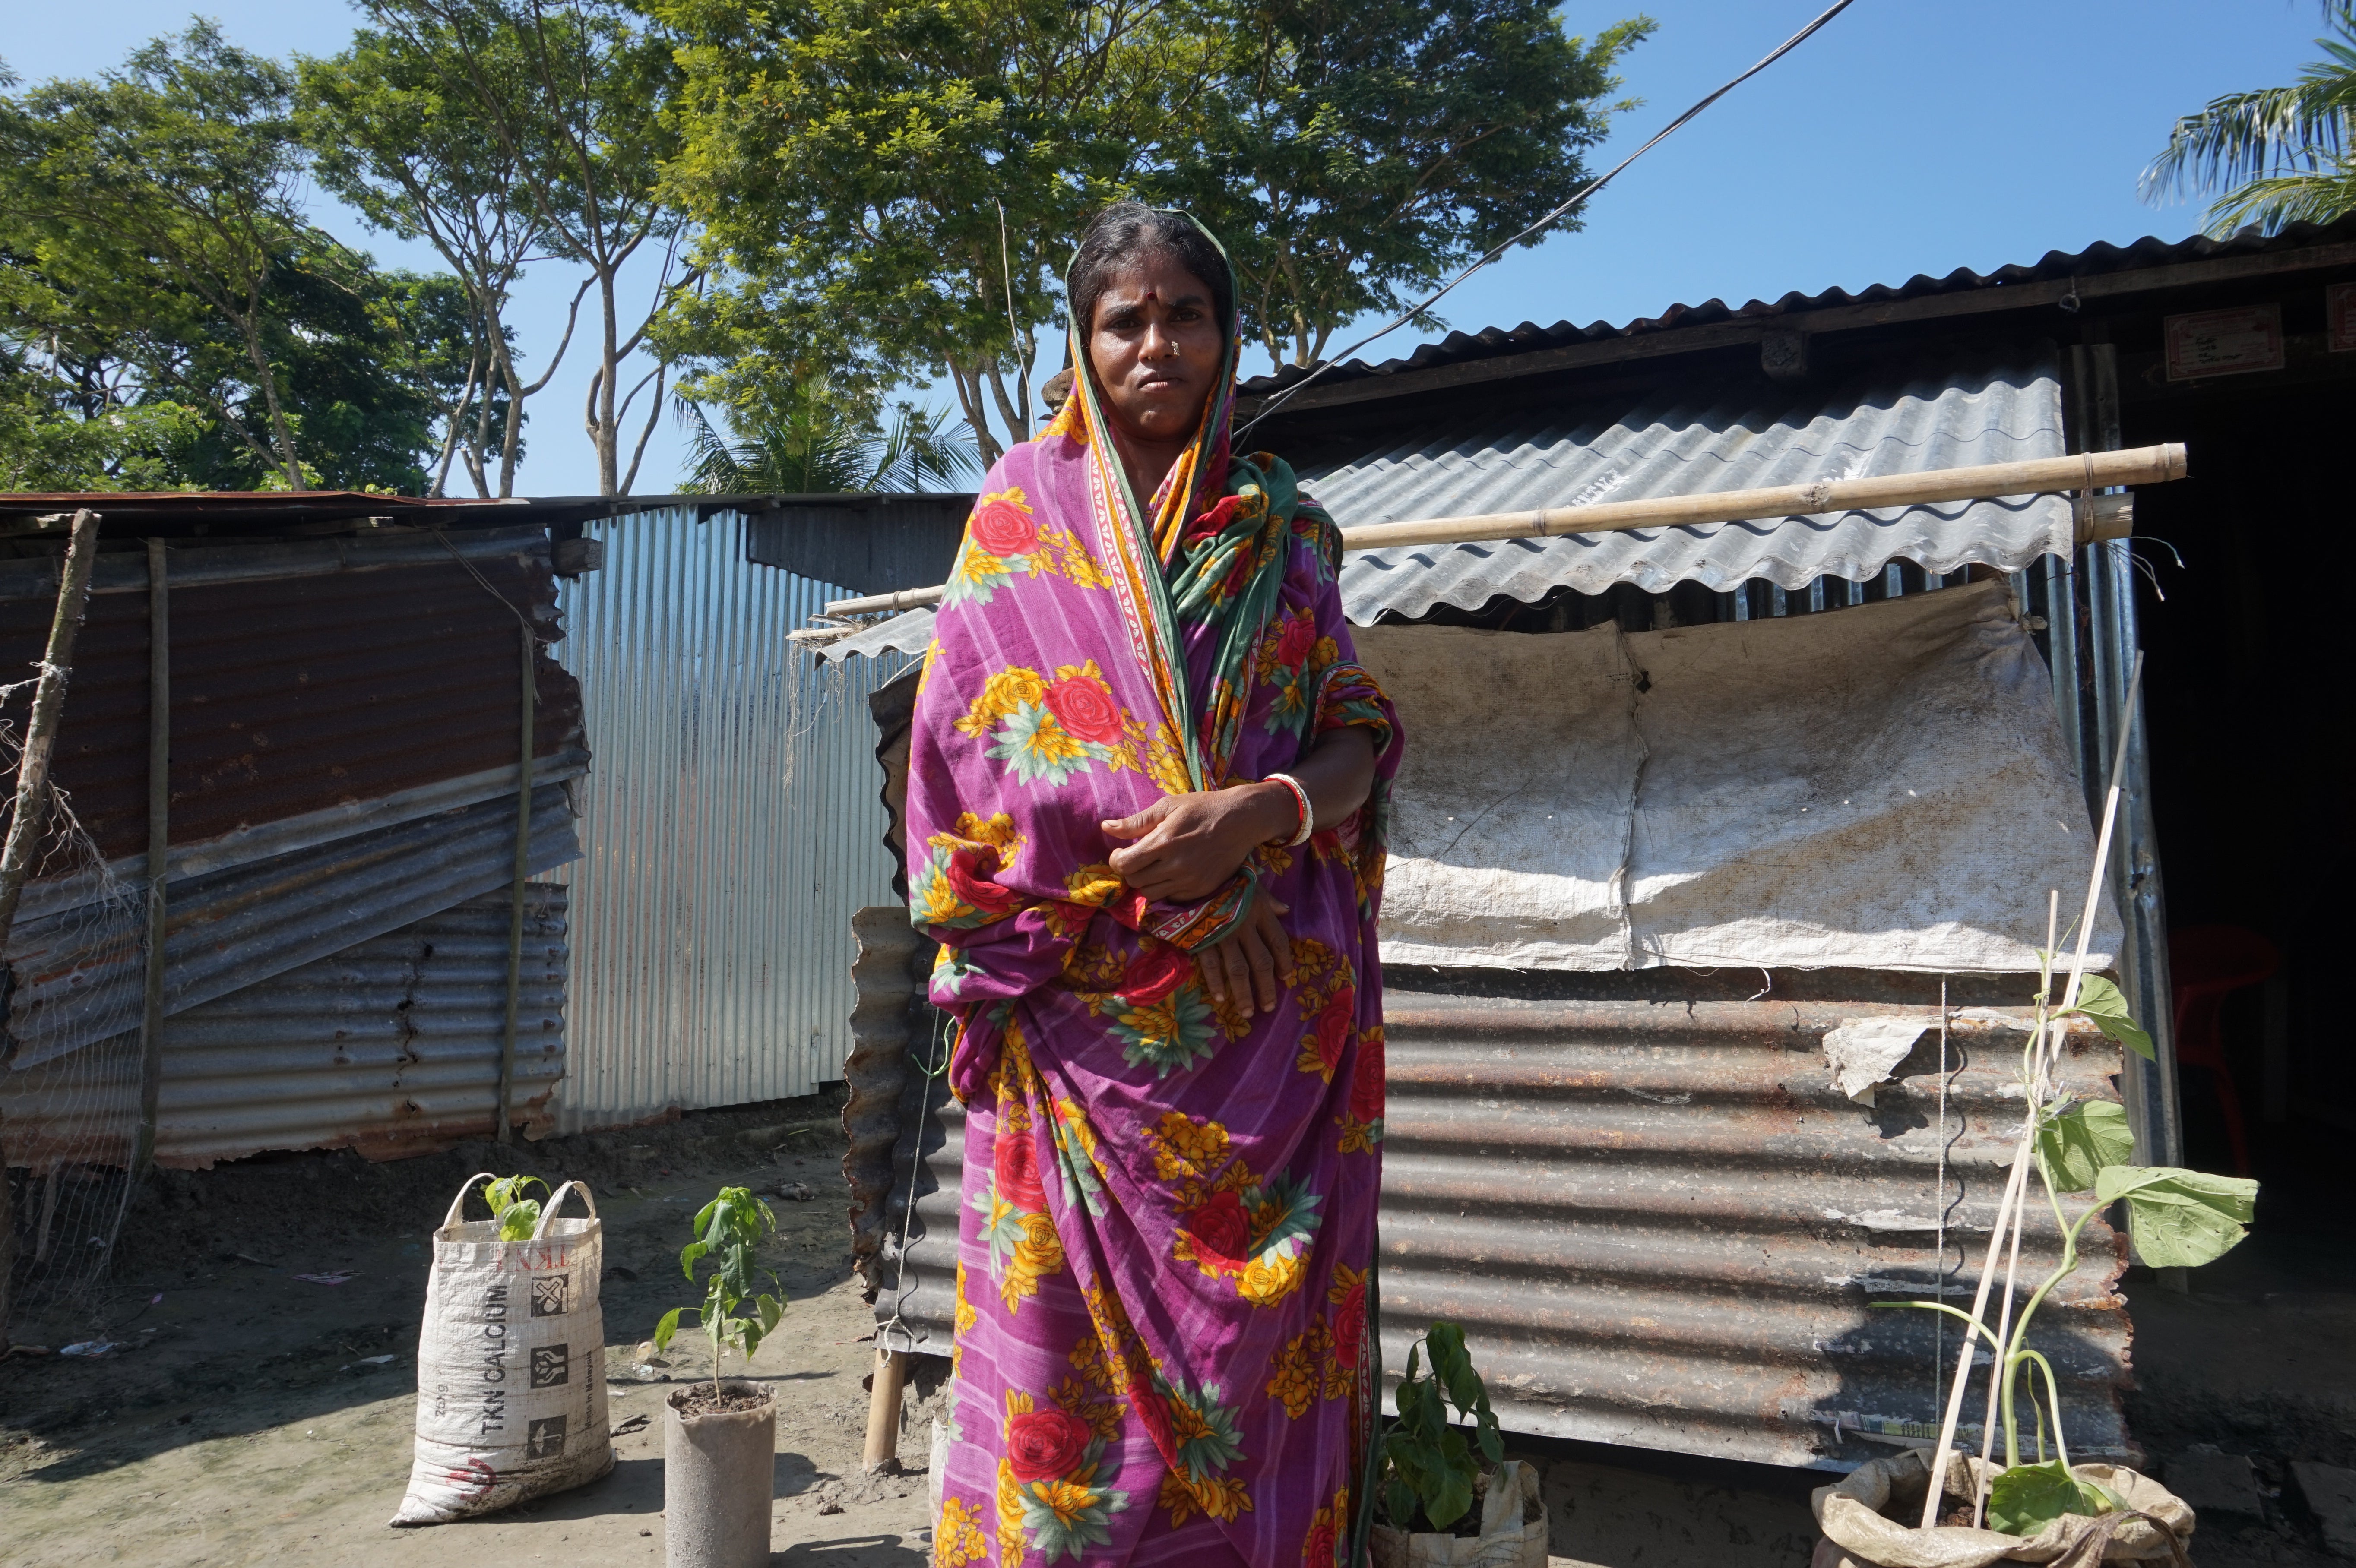 Lipi almost lost her young son in a flood while she was sleeping at home in Bangladesh